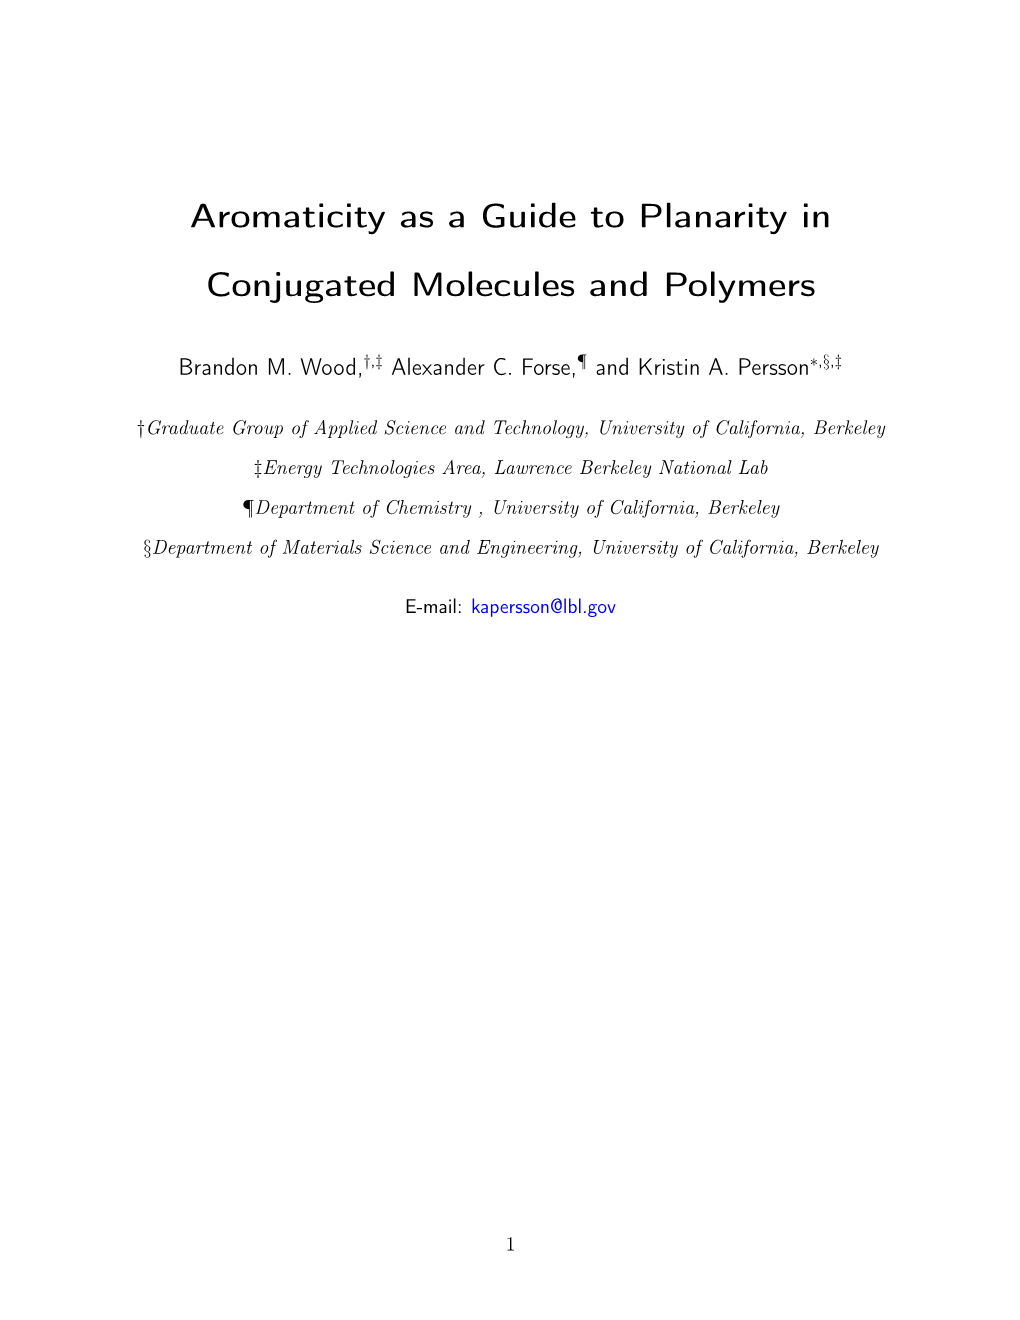 Aromaticity As a Guide to Planarity in Conjugated Molecules and Polymers